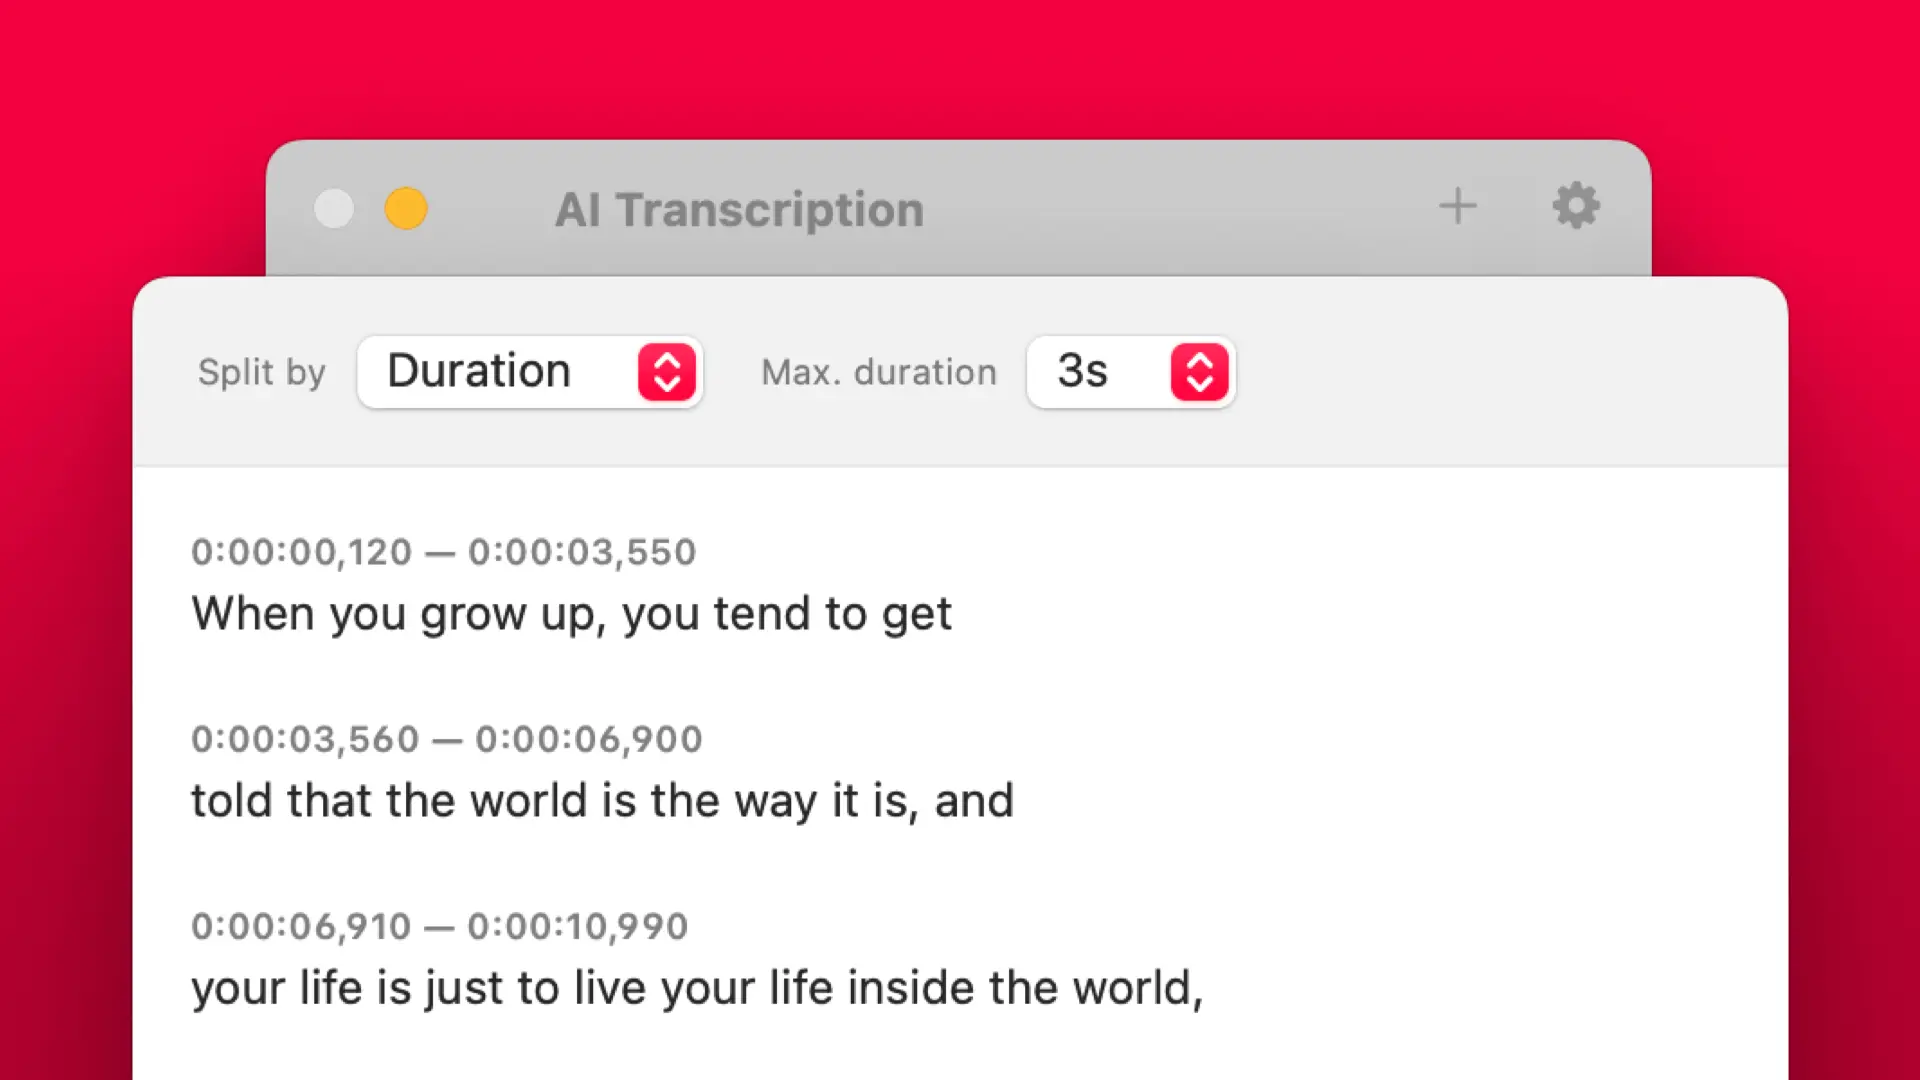 Screenshot of AI Transcription running on macOS, highlighting a detail view of the timing segmentation options.